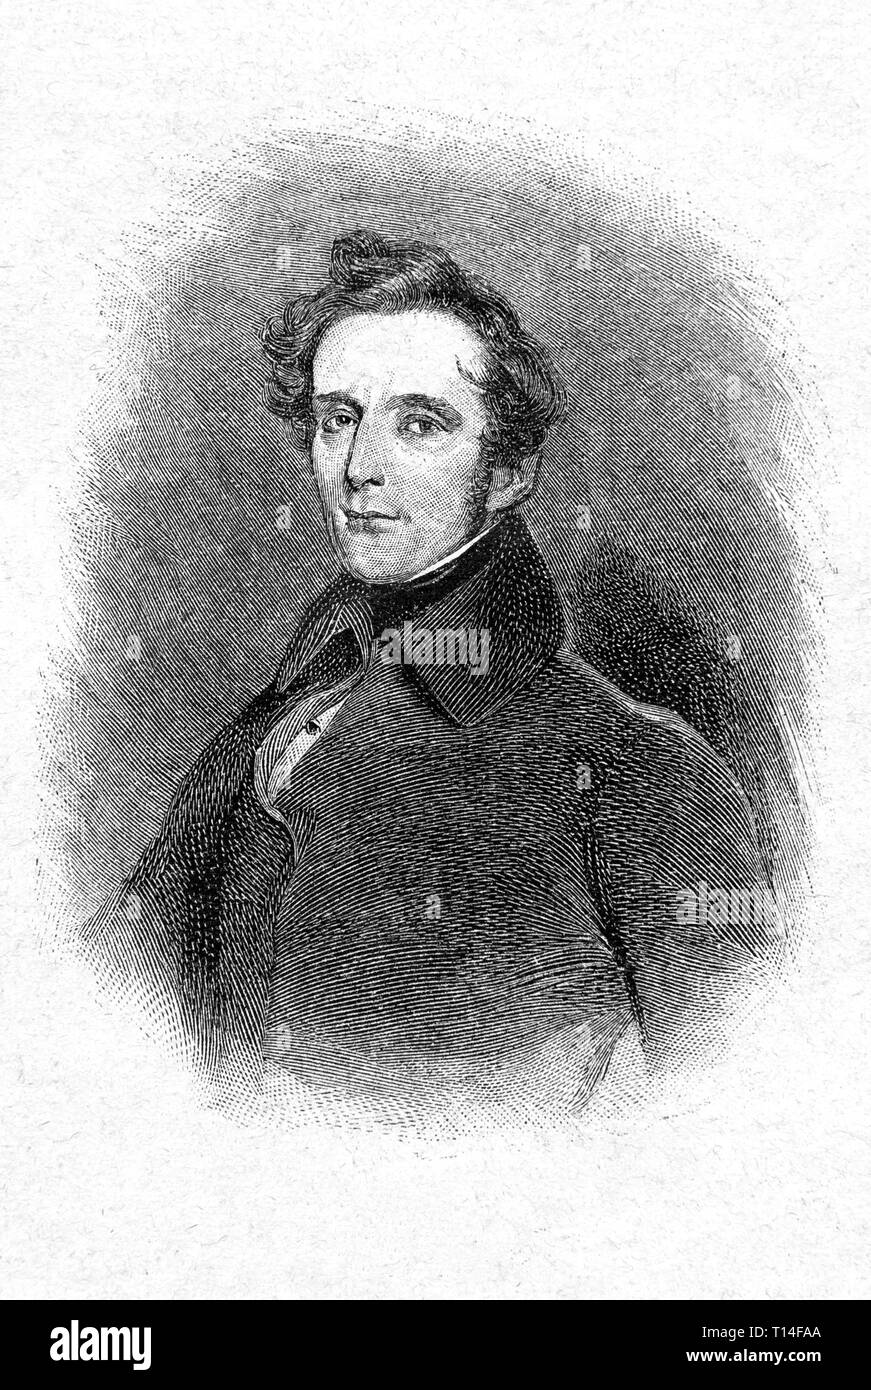 Alphonse Lamartine, by lithography. Digital improved reproduction from Illustrated overview of the life of mankind in the 19th century, 1901 edition, Marx publishing house, St. Petersburg. Stock Photo